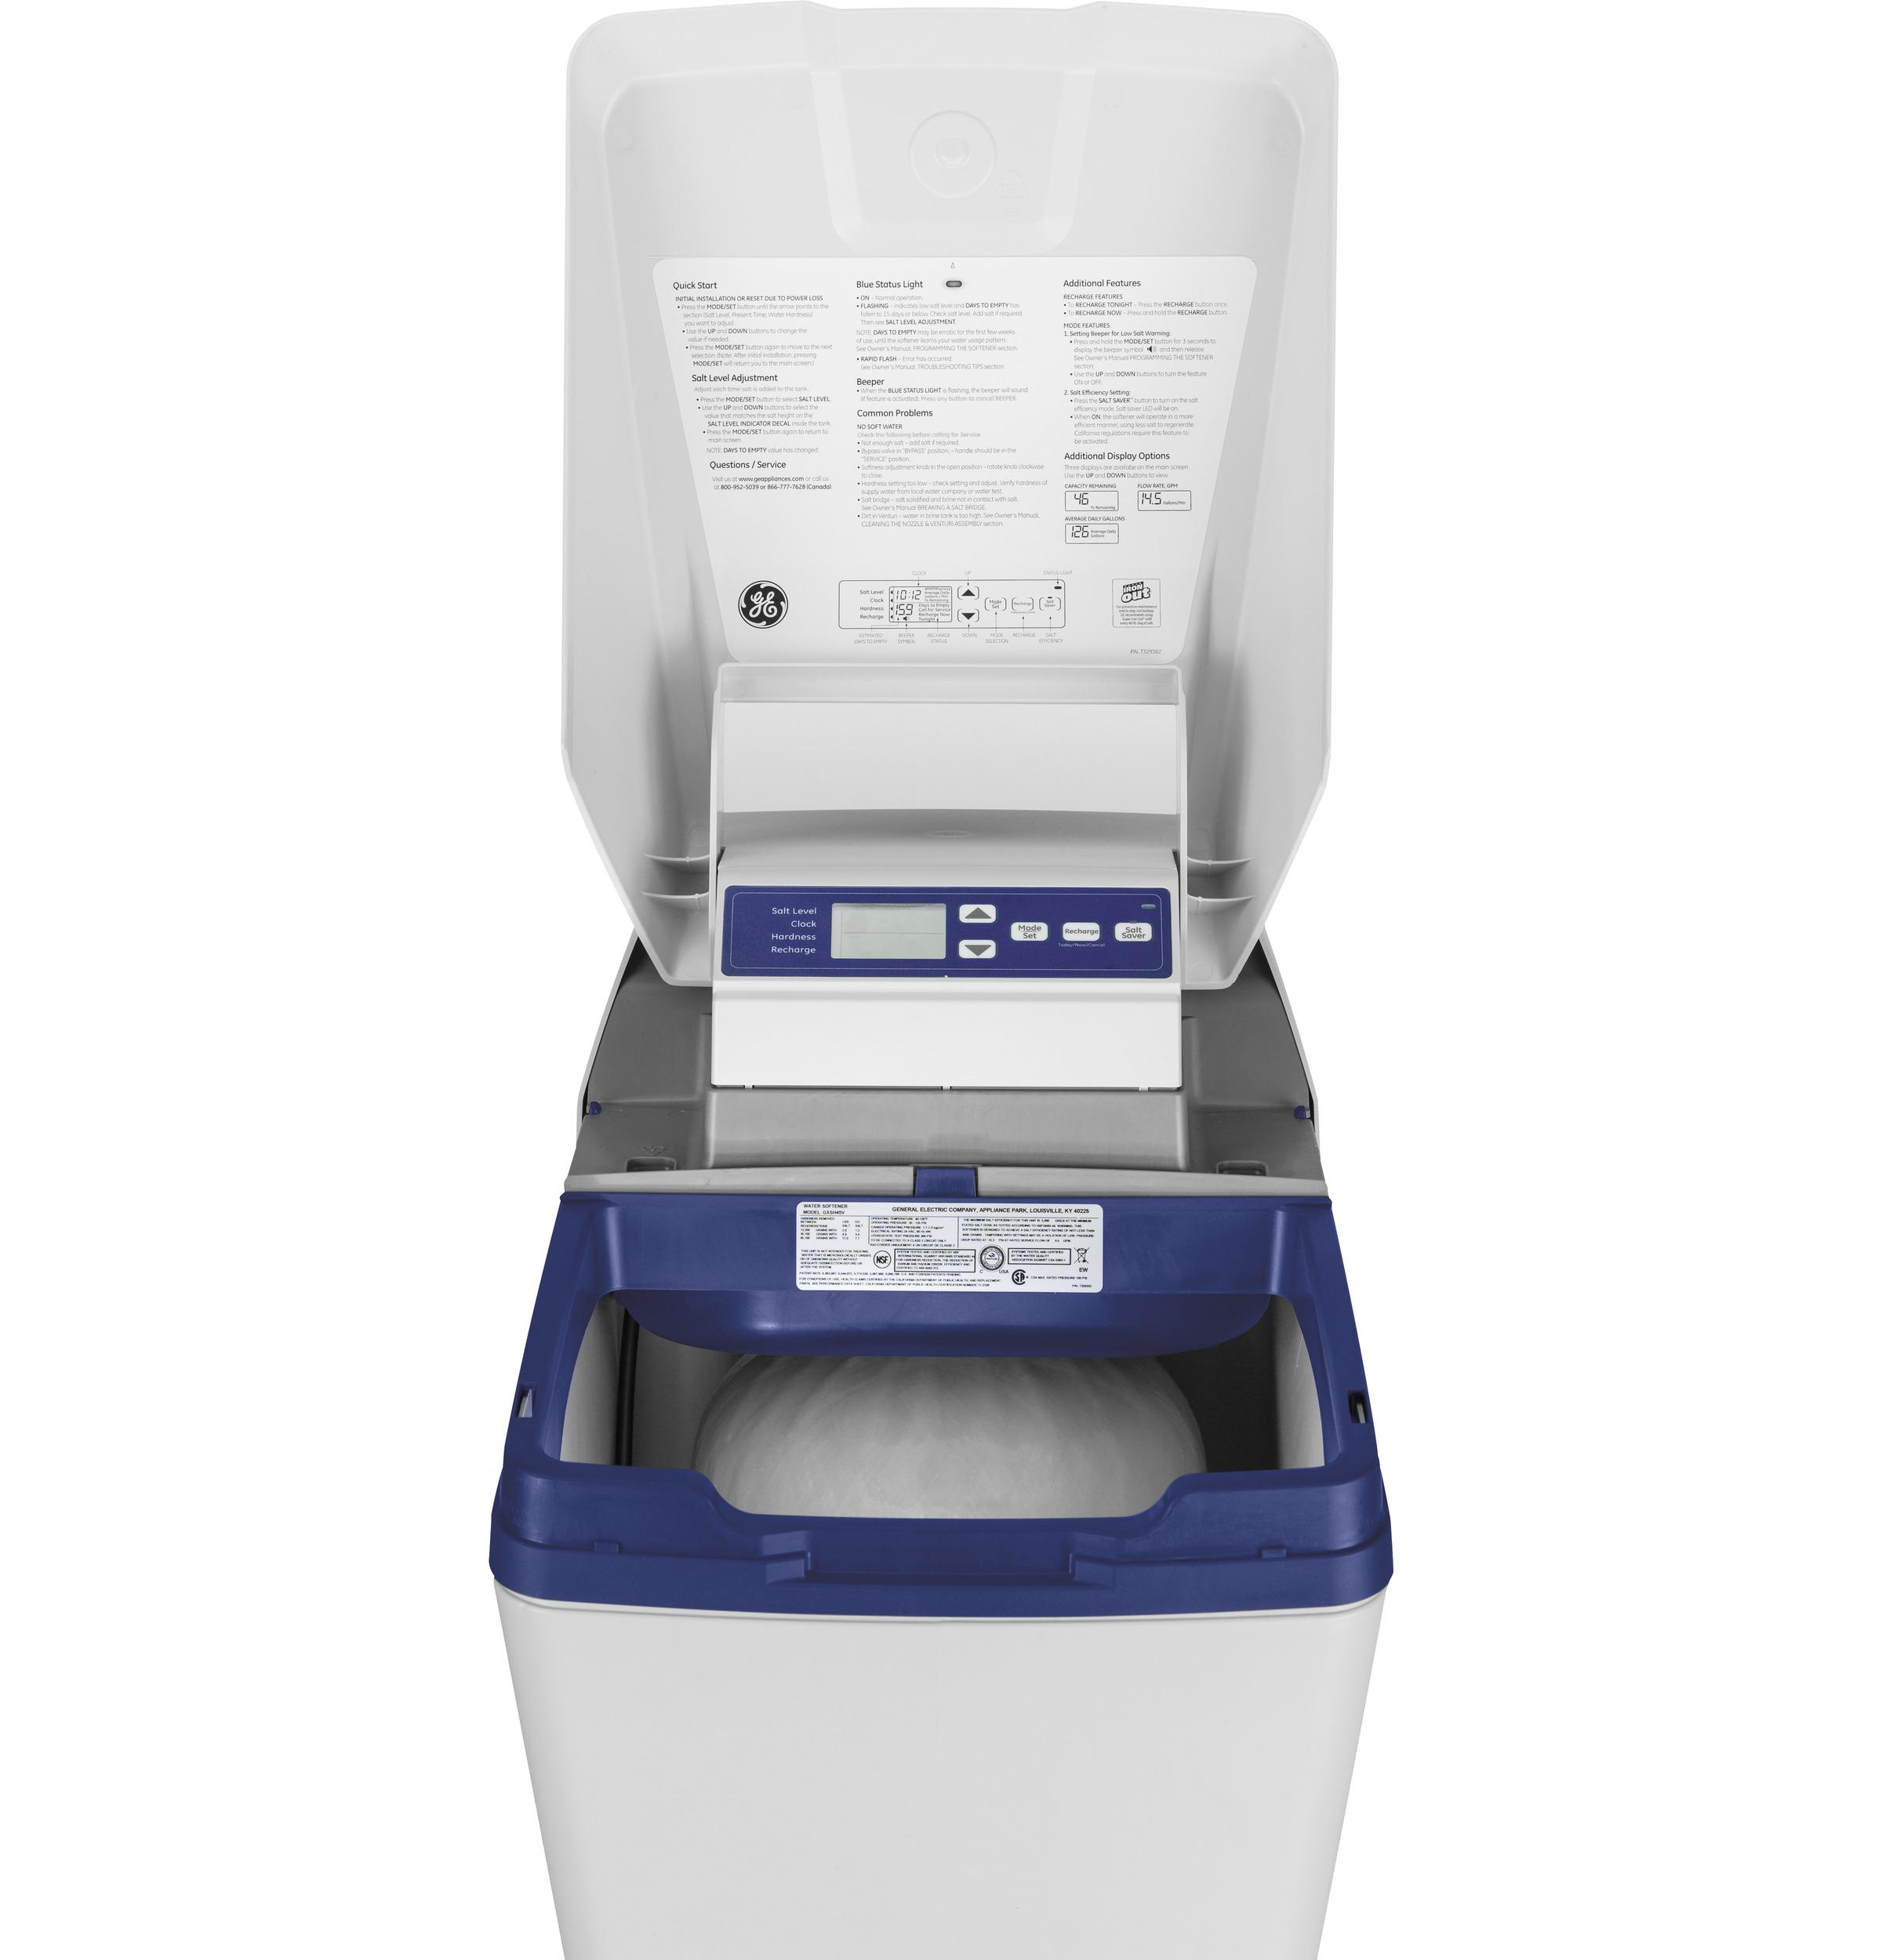 GE® 30,000 Grain Water Softener and Filter In One